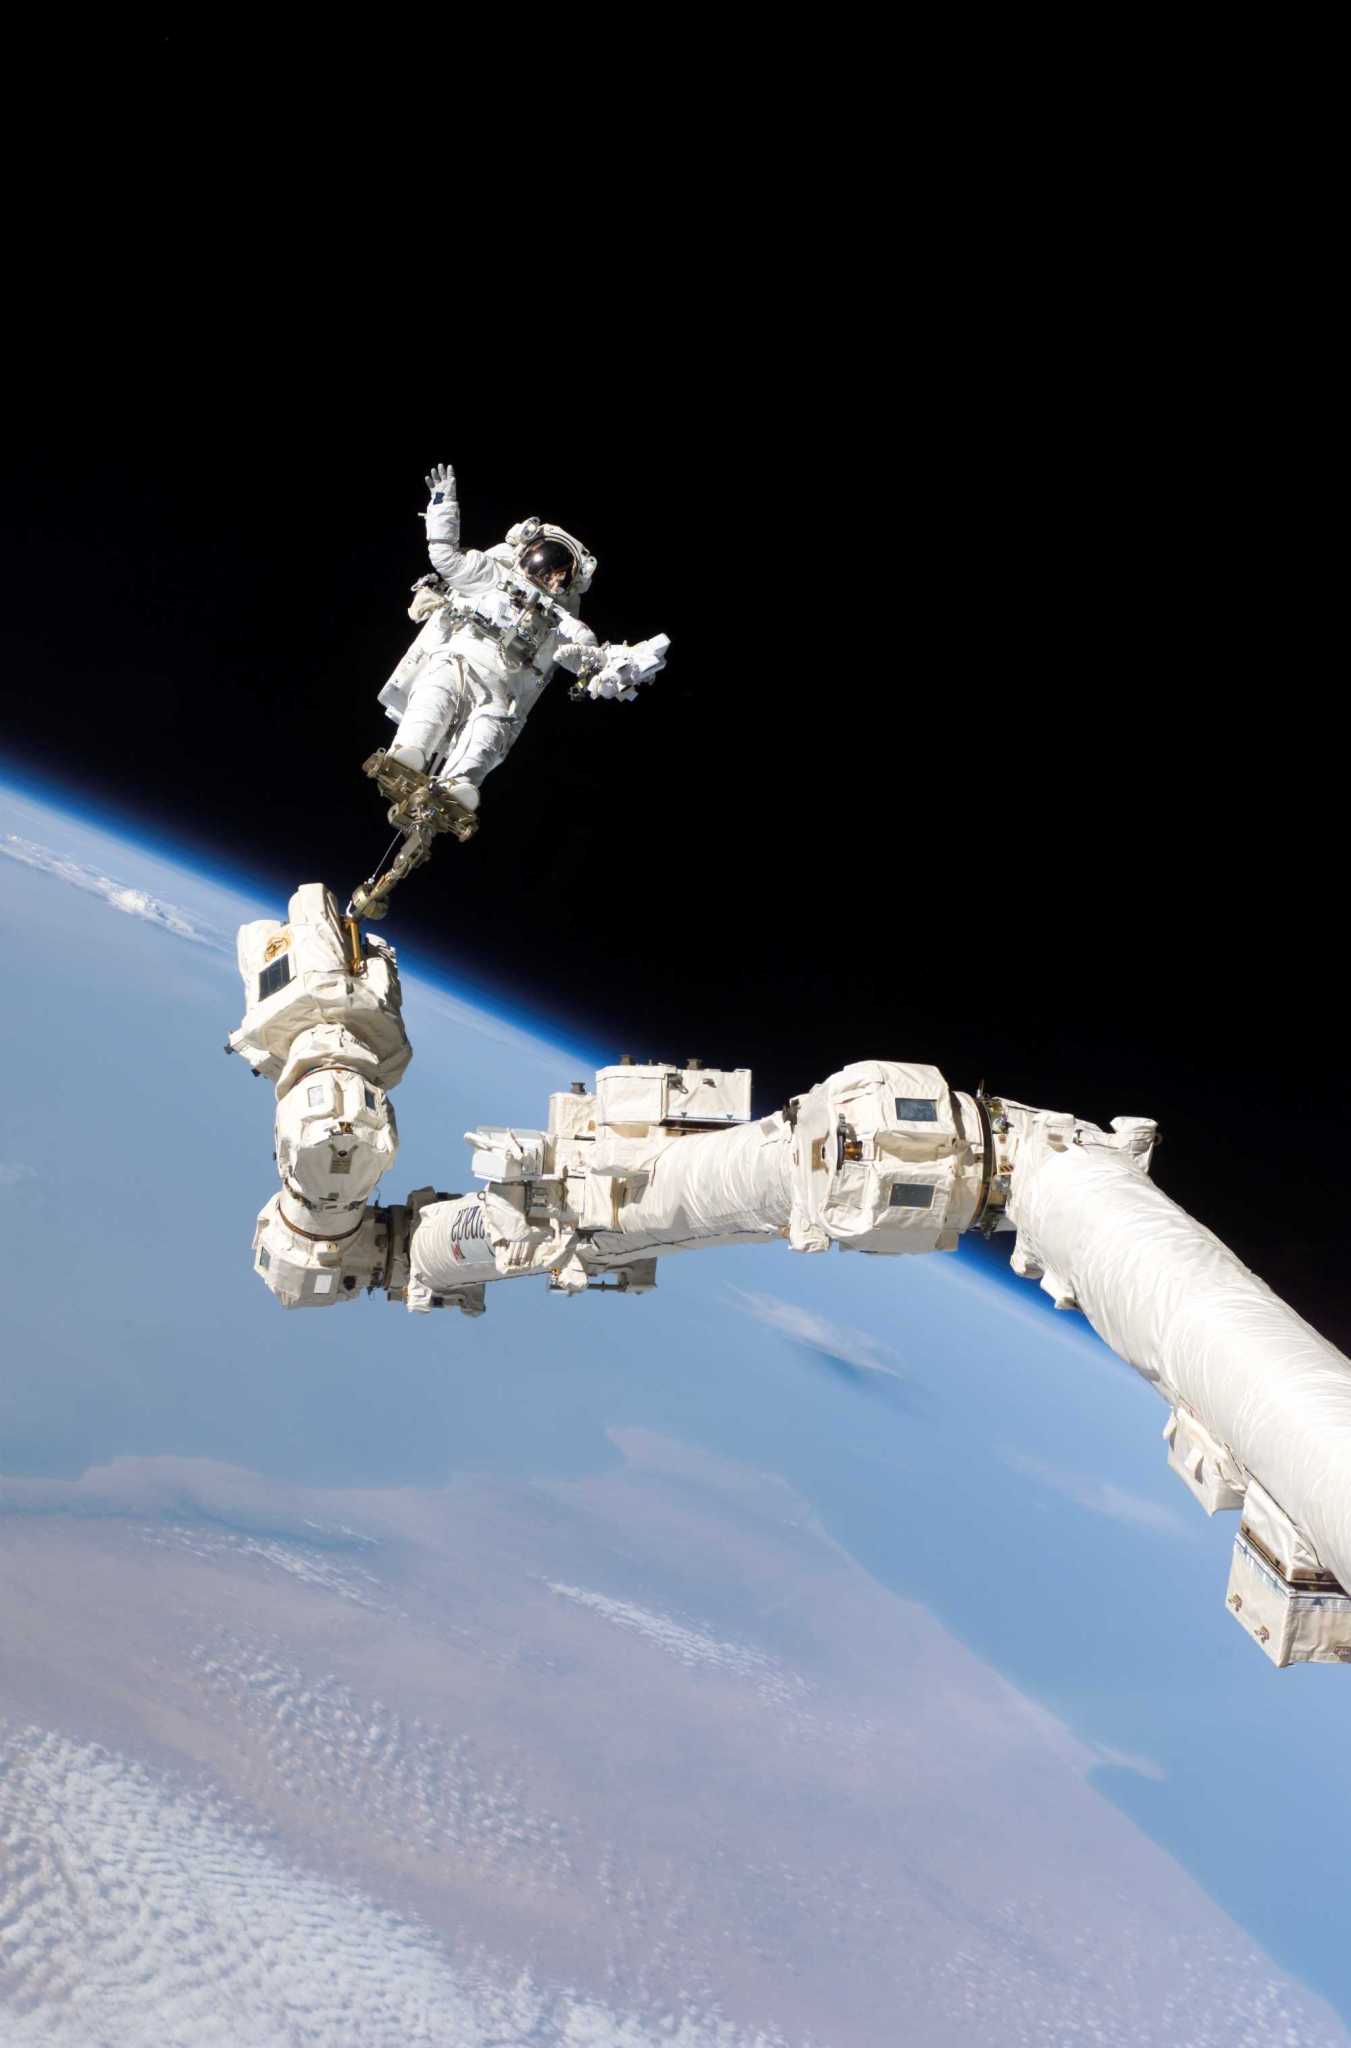 An astronaut is anchored to a foot restraint on the International Space Station's Canadarm2